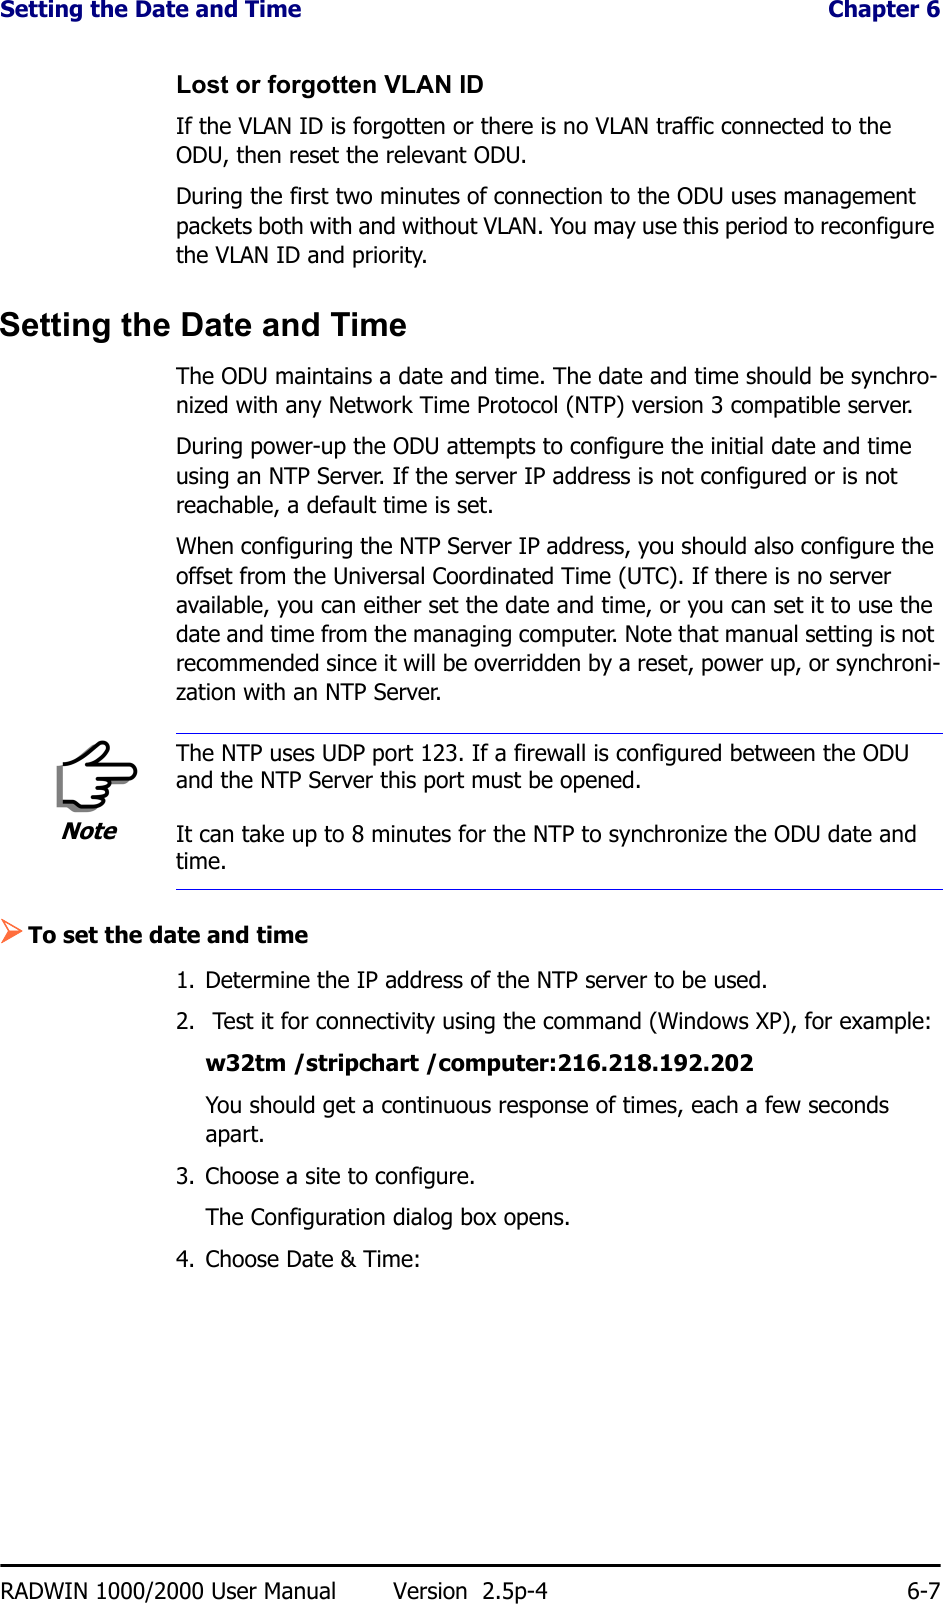 Setting the Date and Time  Chapter 6RADWIN 1000/2000 User Manual Version  2.5p-4 6-7Lost or forgotten VLAN IDIf the VLAN ID is forgotten or there is no VLAN traffic connected to the ODU, then reset the relevant ODU.During the first two minutes of connection to the ODU uses management packets both with and without VLAN. You may use this period to reconfigure the VLAN ID and priority.Setting the Date and TimeThe ODU maintains a date and time. The date and time should be synchro-nized with any Network Time Protocol (NTP) version 3 compatible server.During power-up the ODU attempts to configure the initial date and time using an NTP Server. If the server IP address is not configured or is not reachable, a default time is set.When configuring the NTP Server IP address, you should also configure the offset from the Universal Coordinated Time (UTC). If there is no server available, you can either set the date and time, or you can set it to use the date and time from the managing computer. Note that manual setting is not recommended since it will be overridden by a reset, power up, or synchroni-zation with an NTP Server.¾To set the date and time1. Determine the IP address of the NTP server to be used.2.  Test it for connectivity using the command (Windows XP), for example:w32tm /stripchart /computer:216.218.192.202You should get a continuous response of times, each a few seconds apart.3. Choose a site to configure.The Configuration dialog box opens.4. Choose Date &amp; Time:NoteThe NTP uses UDP port 123. If a firewall is configured between the ODU and the NTP Server this port must be opened.It can take up to 8 minutes for the NTP to synchronize the ODU date and time.